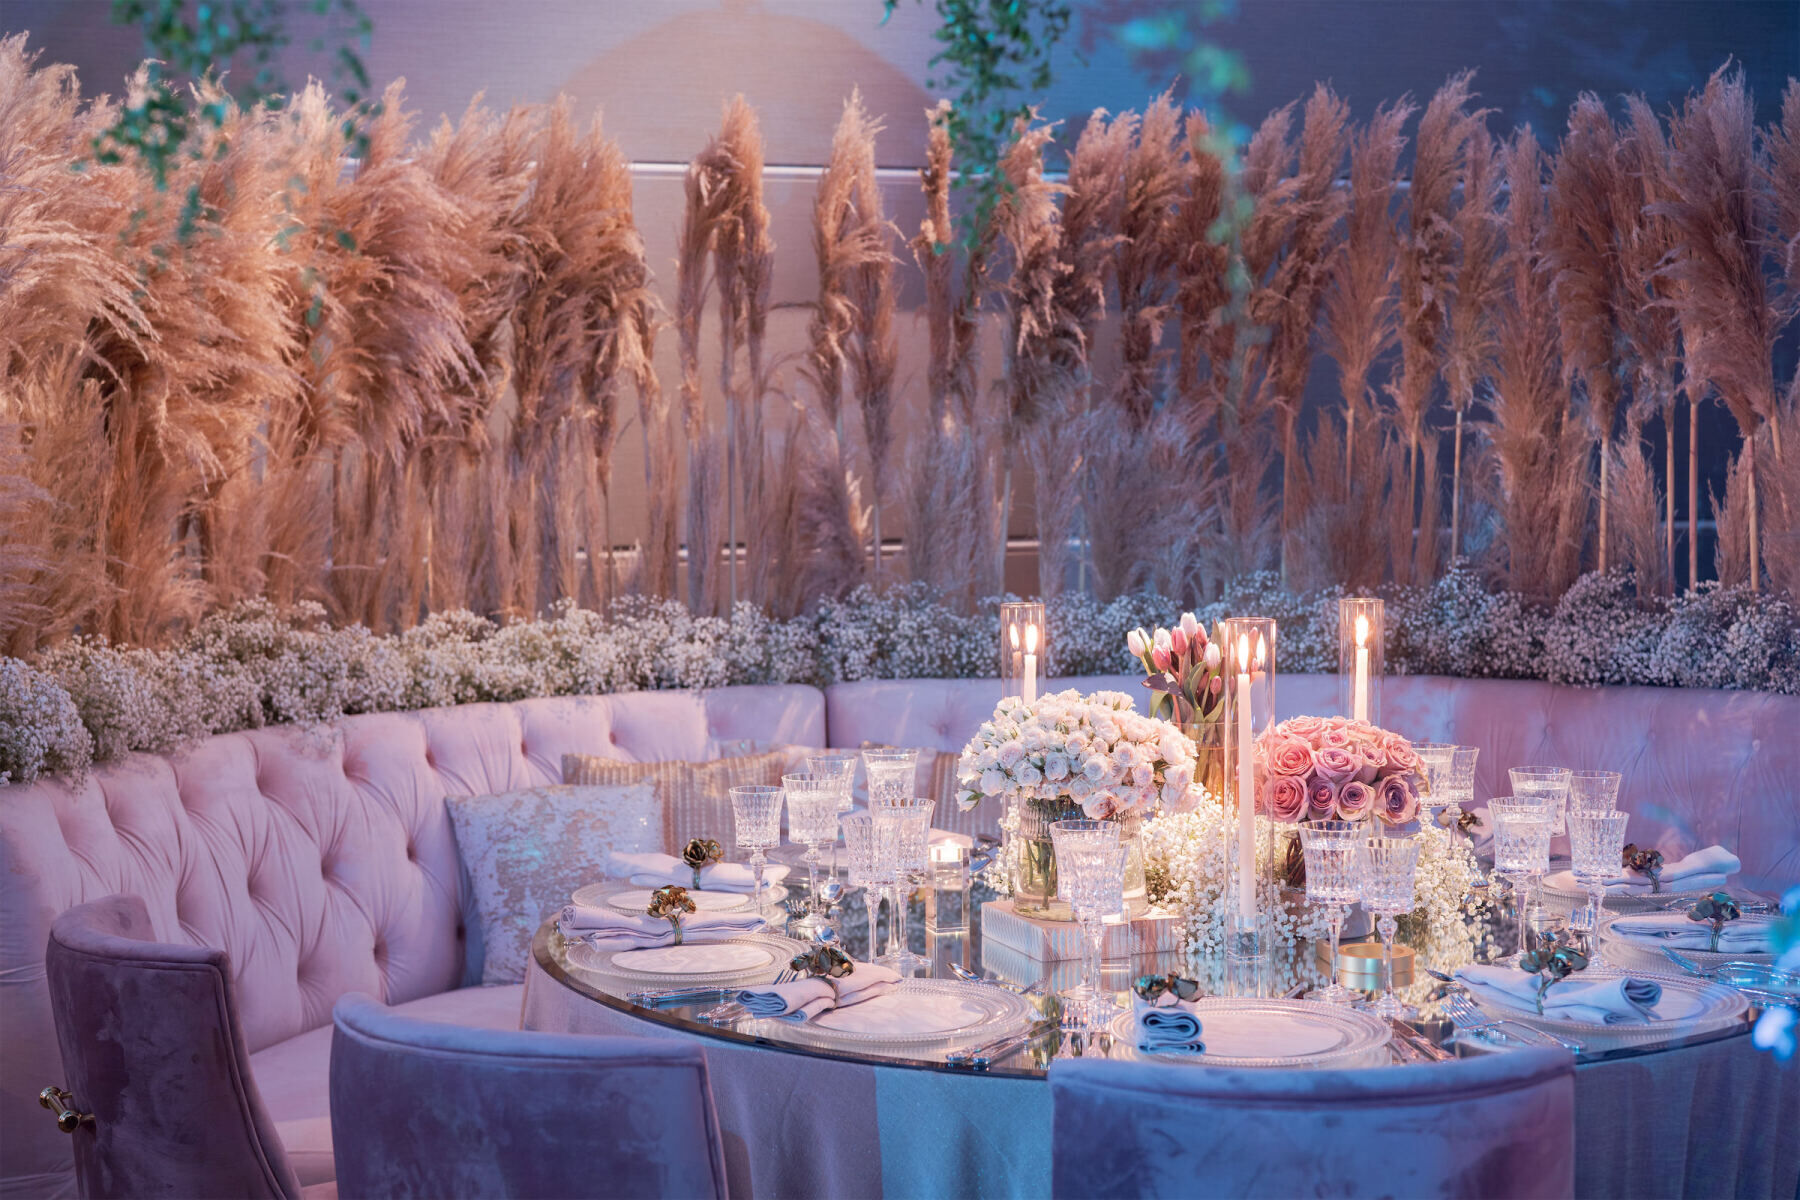 Pampas grass surrounds a tufted banquet and round table at this indoor, museum wedding reception inspired in part by North Carolina.